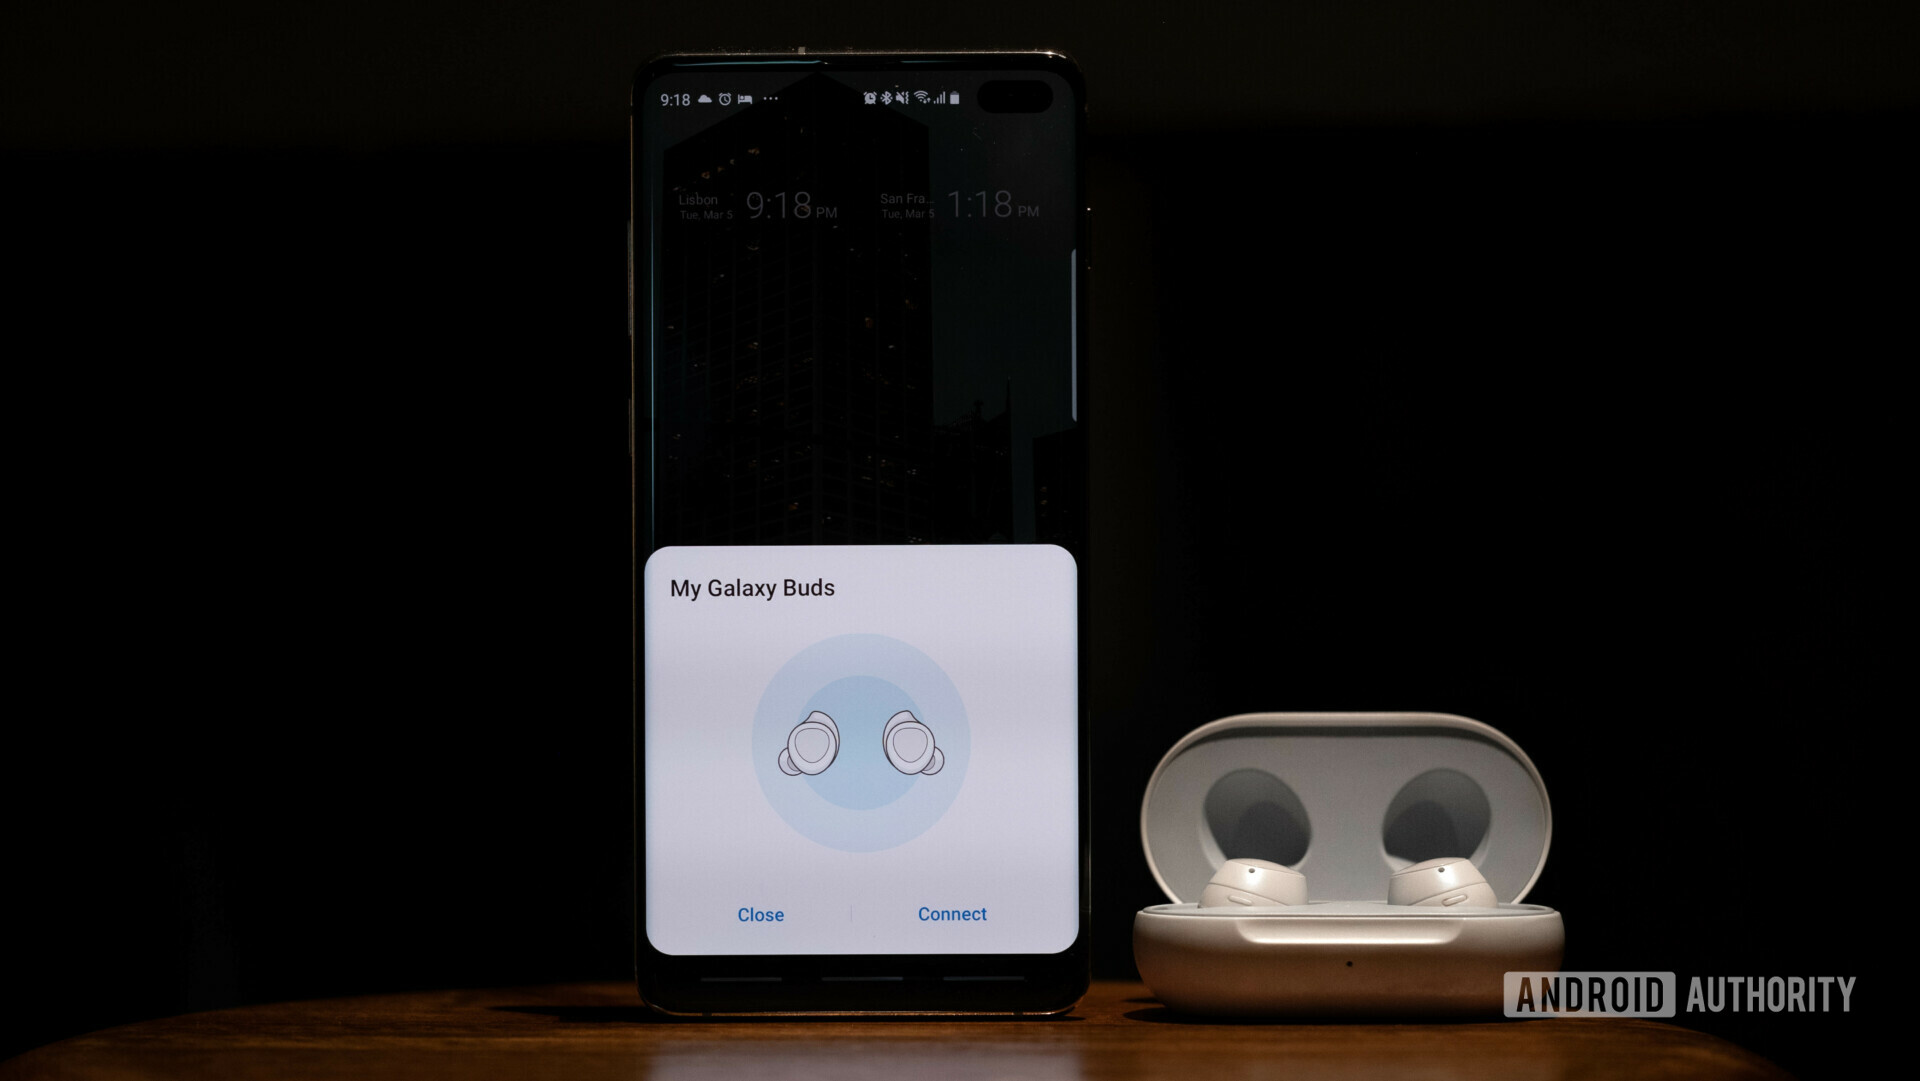 Samsung Galaxy Buds in a case next to a Galaxy S10 showing the pairing menu.